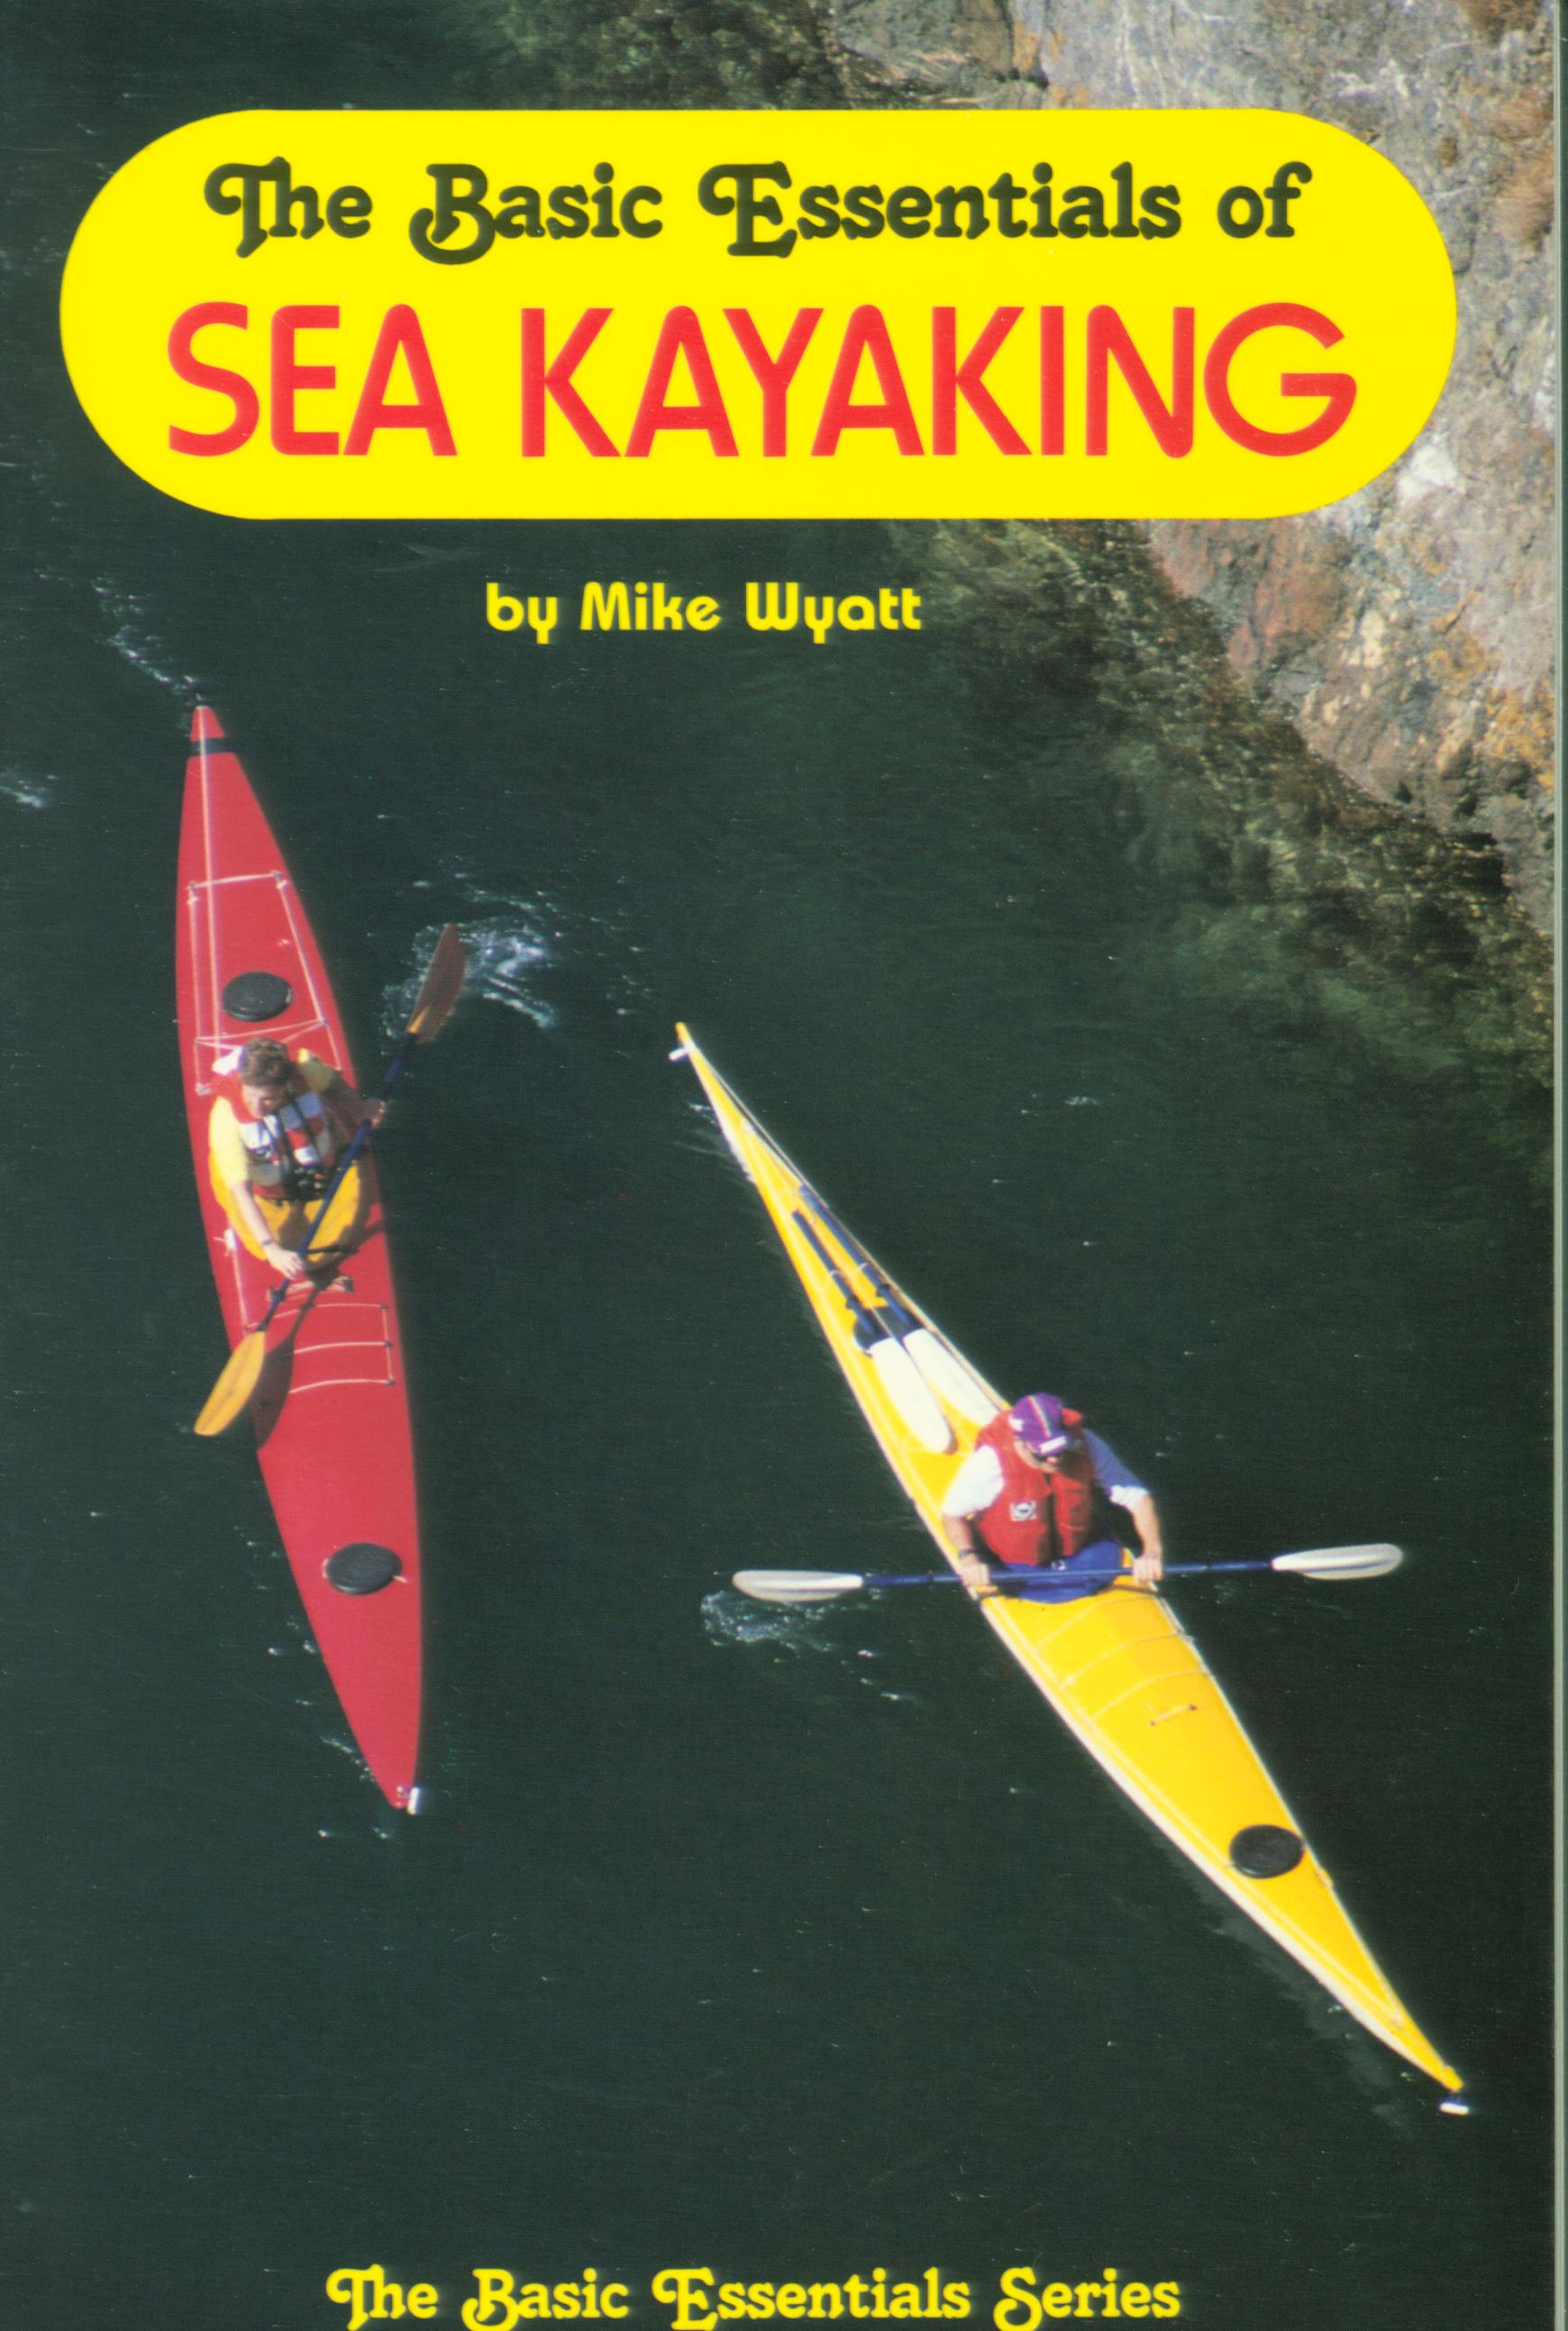 THE BASIC ESSENTIALS OF SEA KAYAKING.